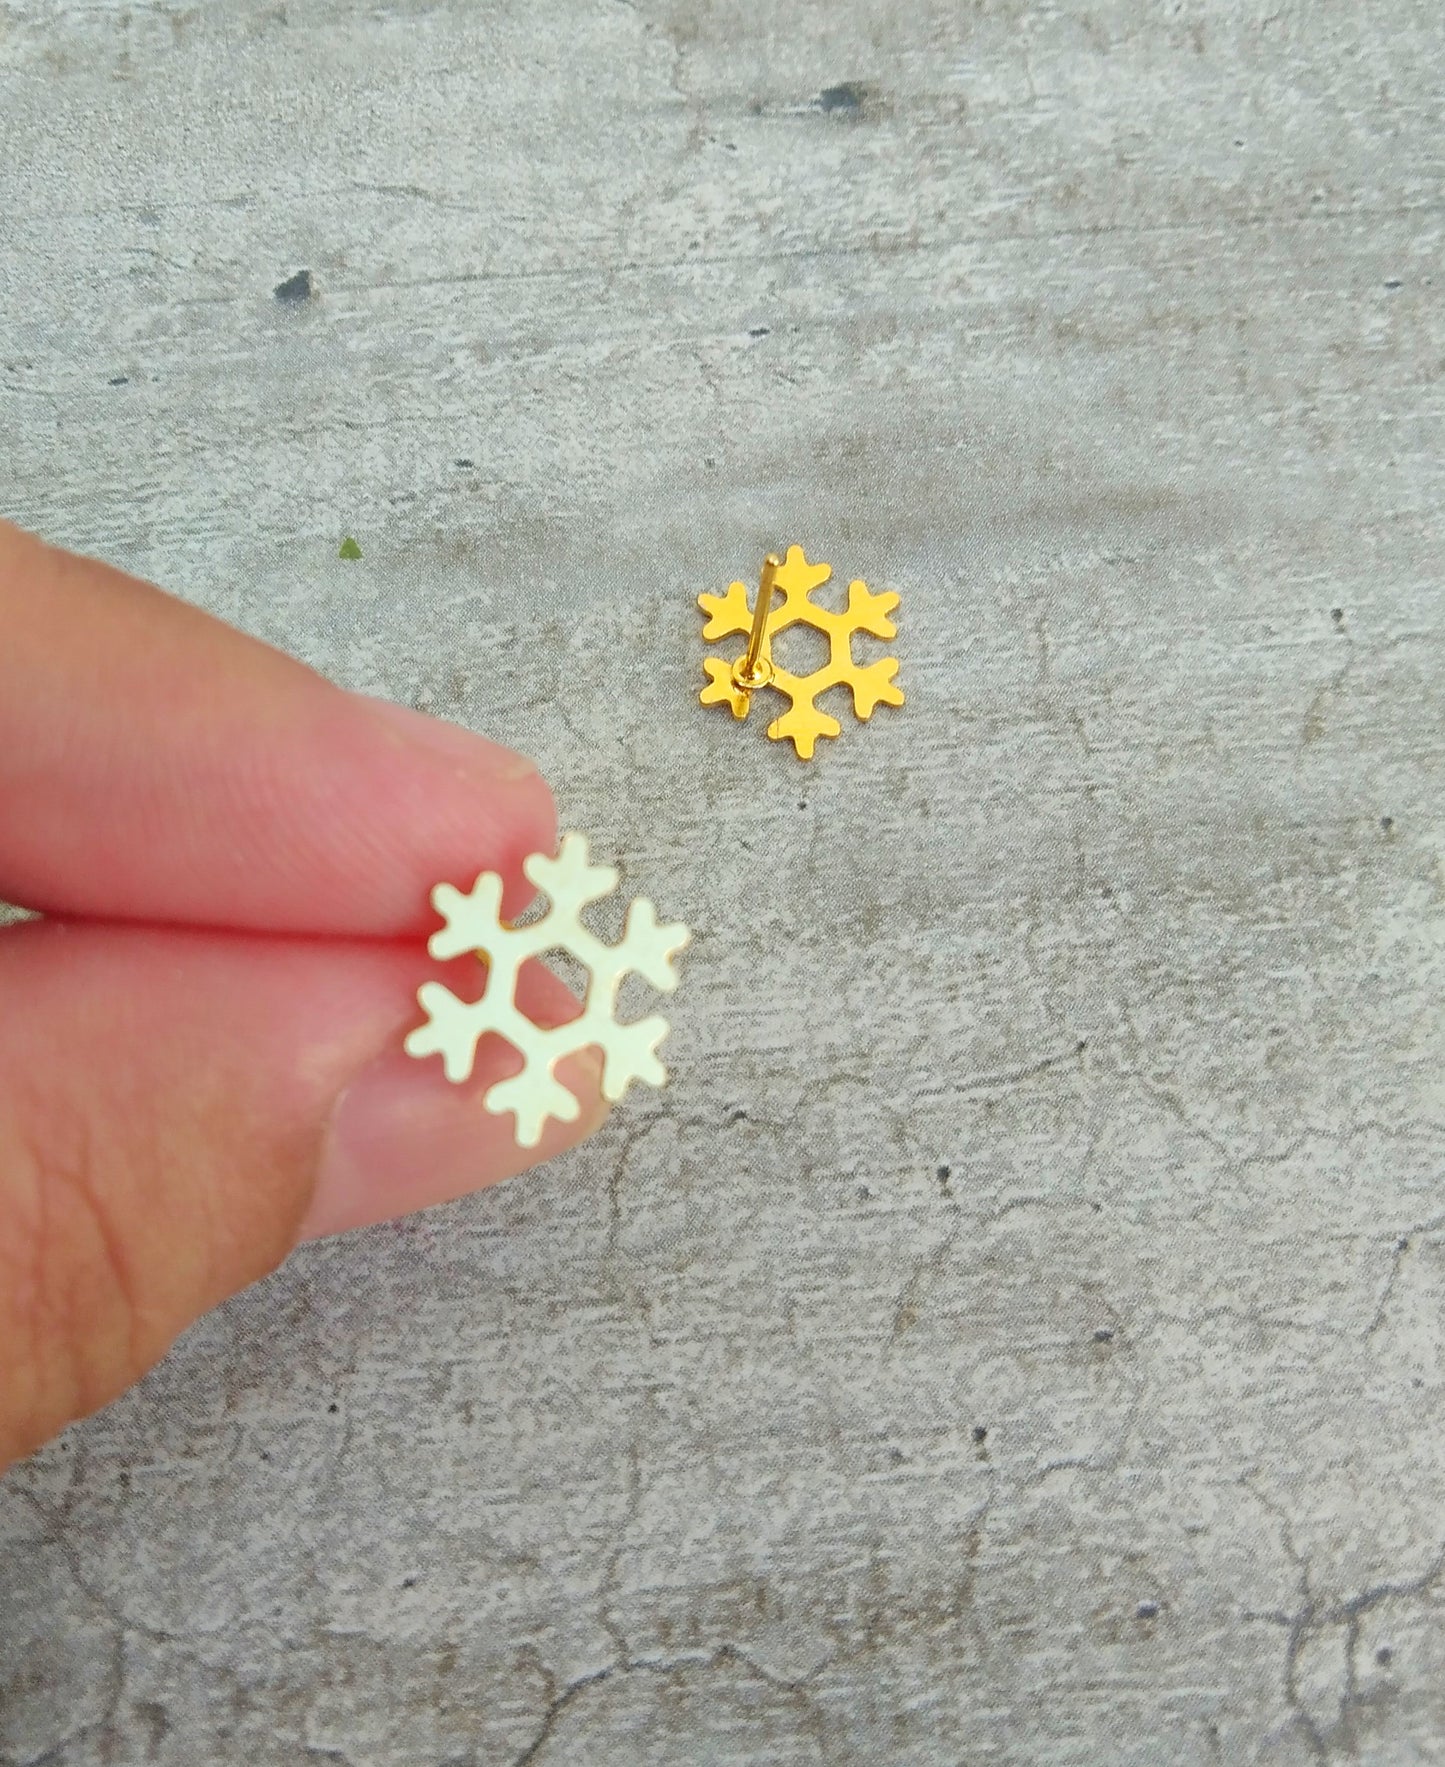 Snowflake Stud Earrings, Gold Plated Studs, Weather Girl Gifts